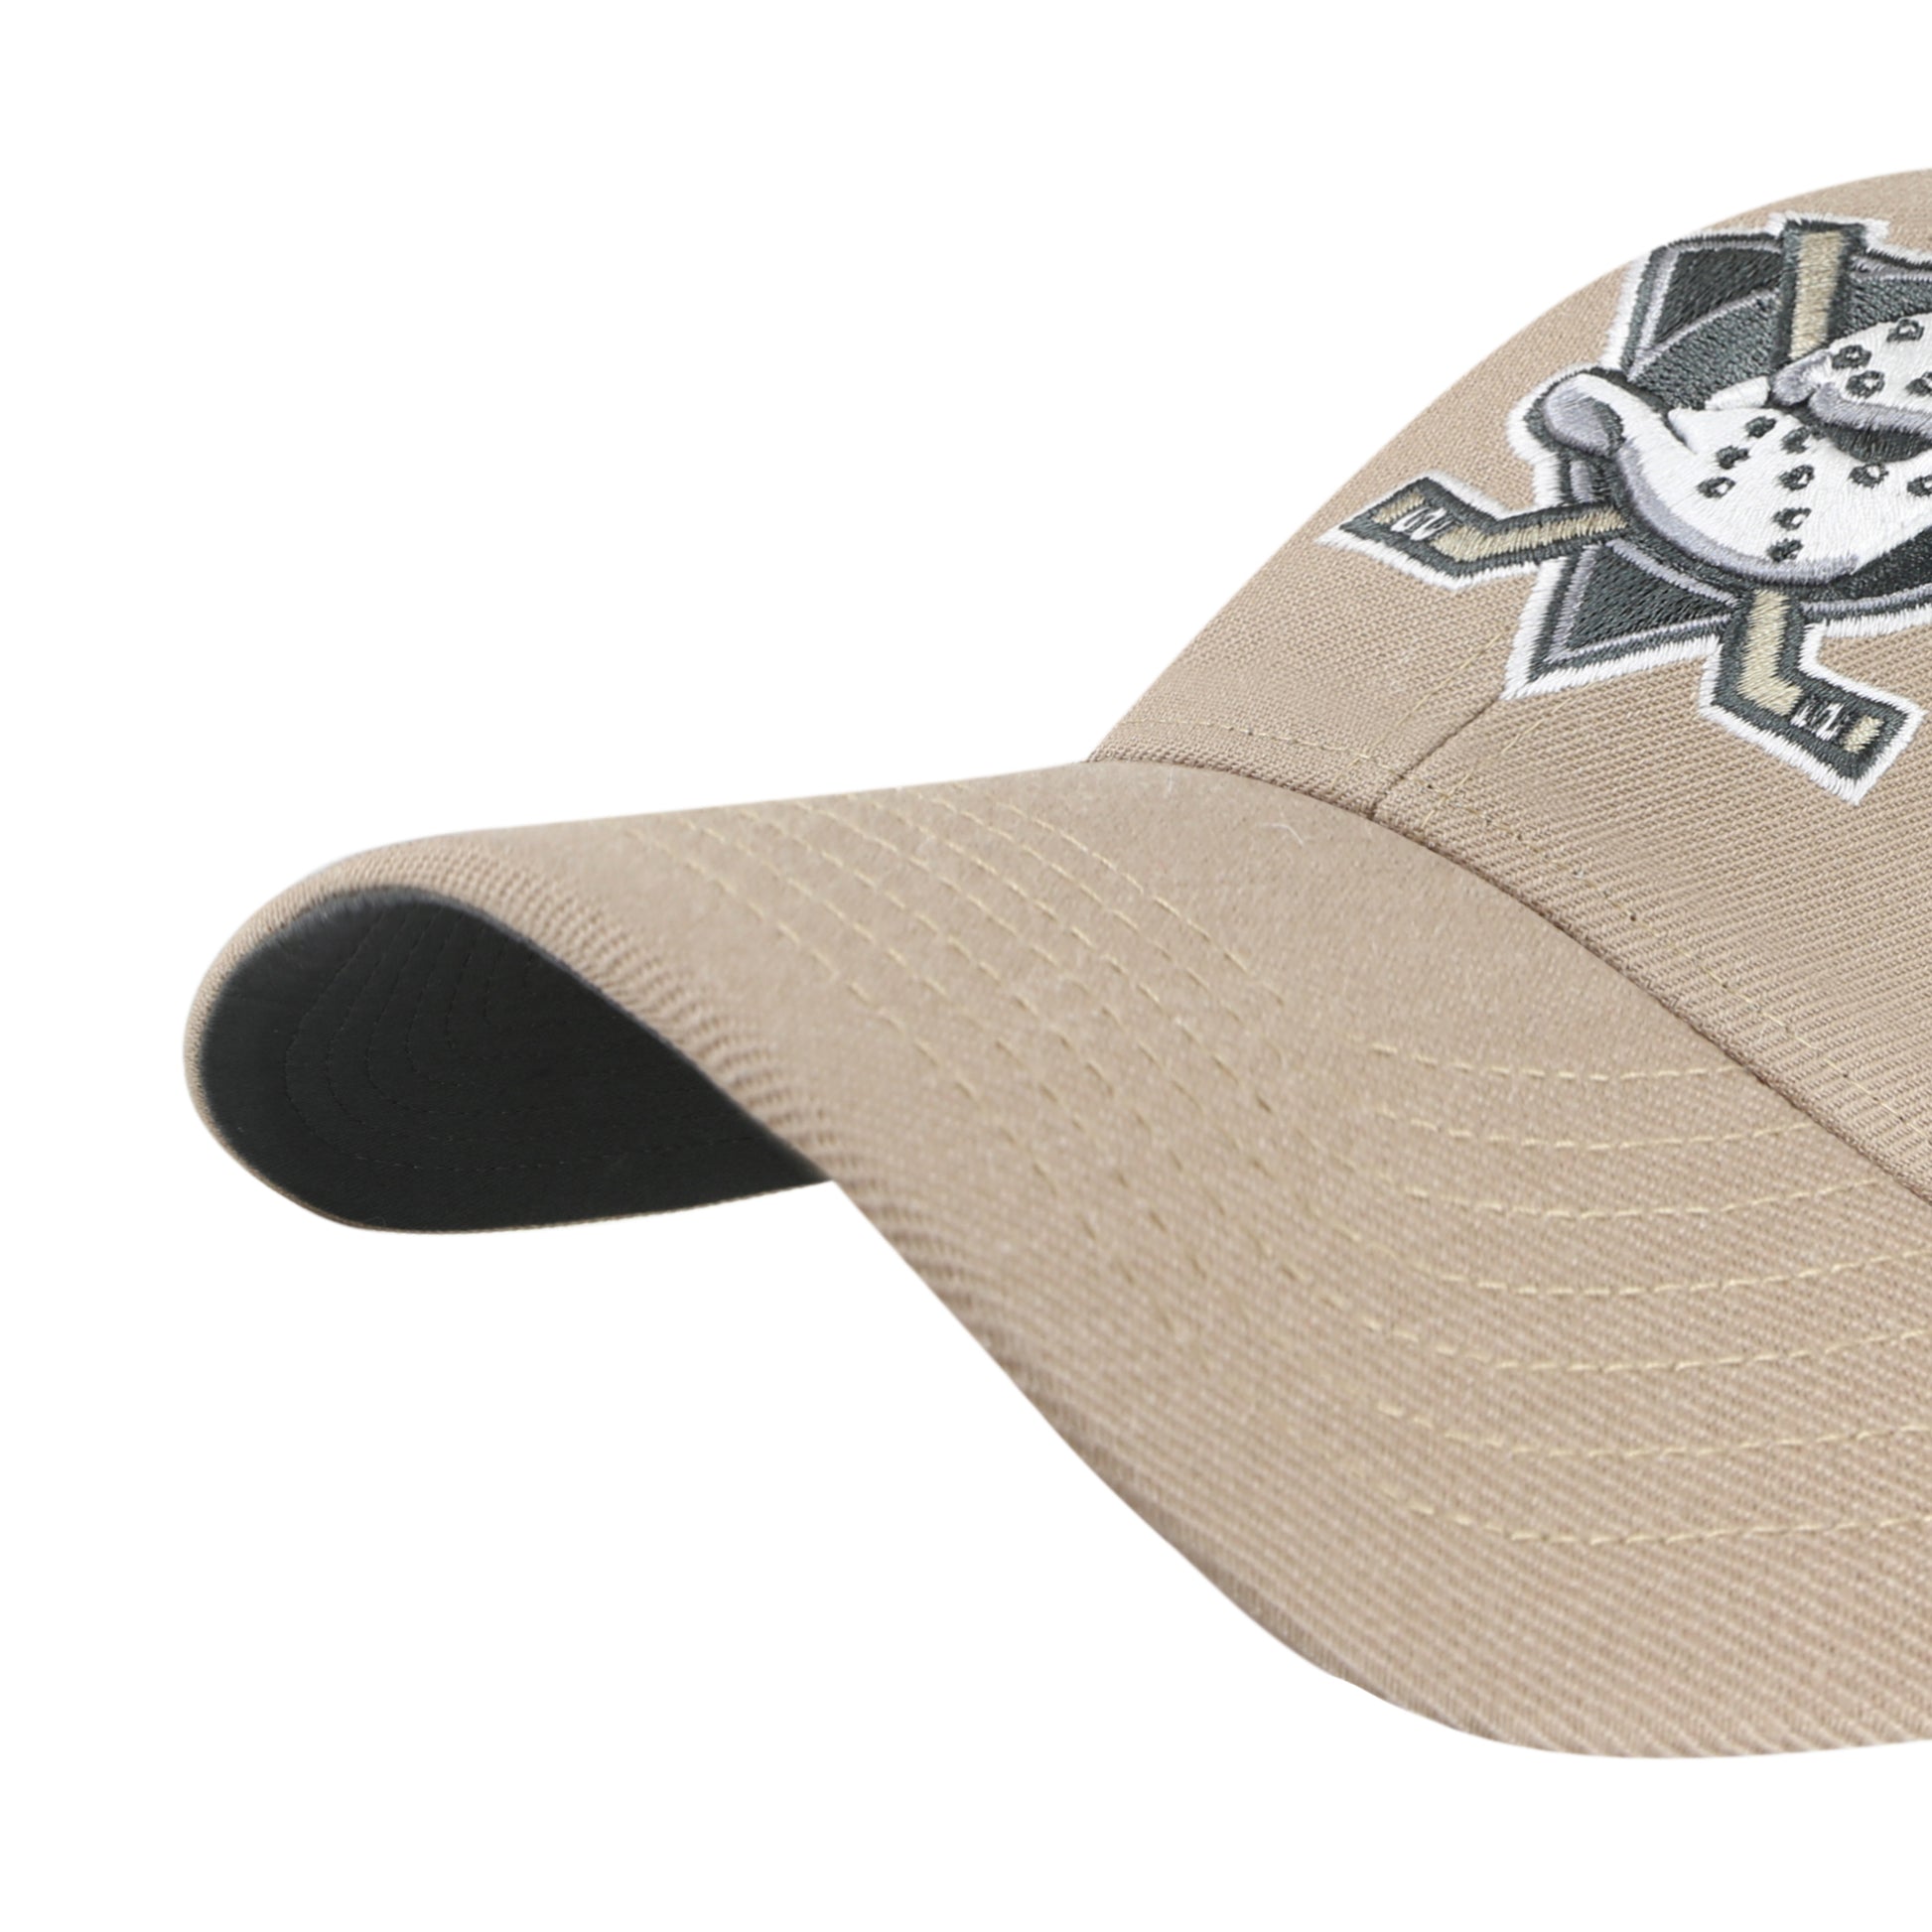 47 Brand Anaheim Ducks NHL adjustable cap available in 3 colors